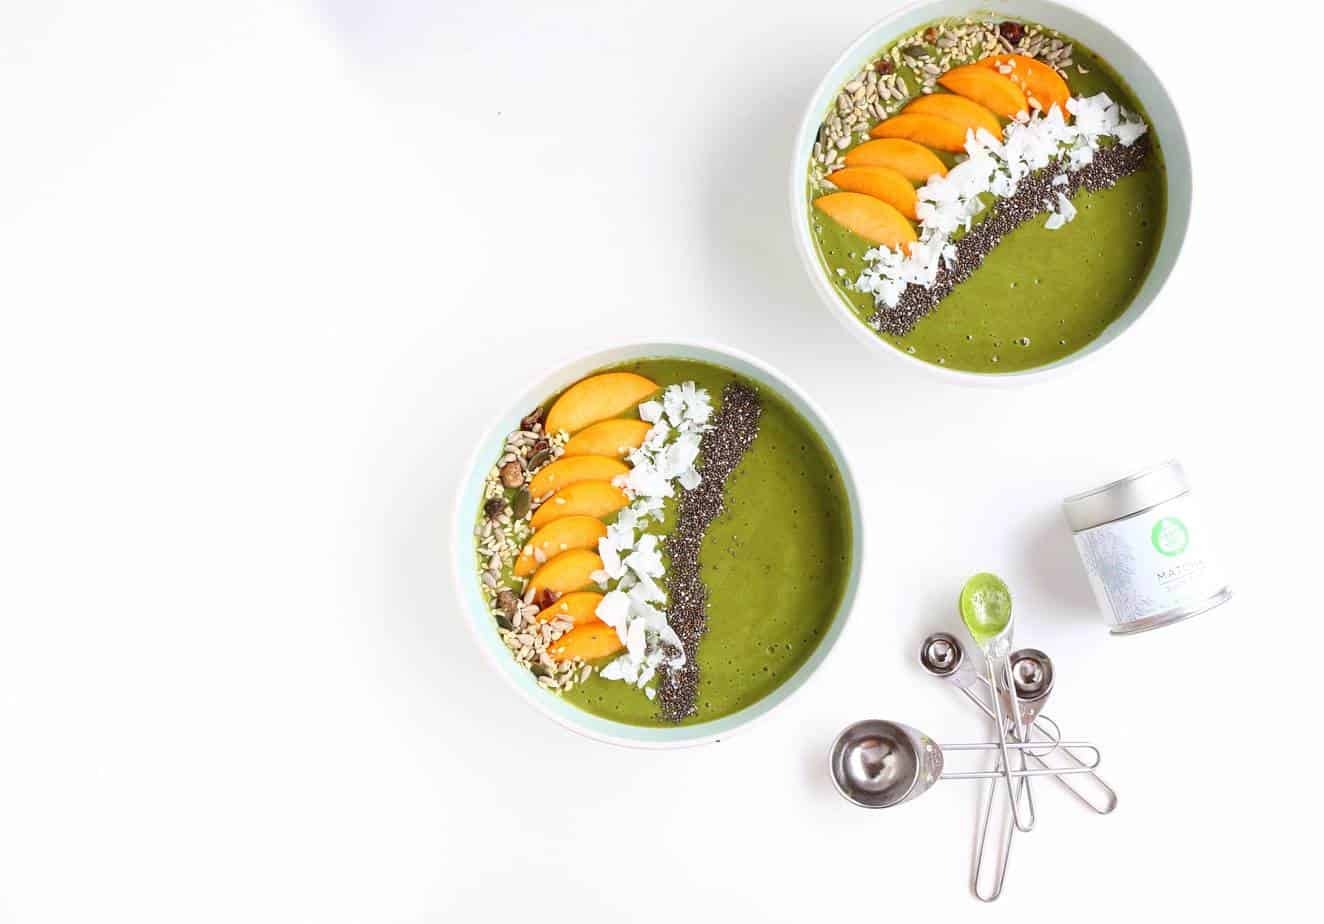 Matcha Peach Smoothie Bowl - The ultimate healthy breakfast or snack that looks beautiful, tastes delicious and is insanely easy to make. Packed with tons of antioxidants and nutrients.